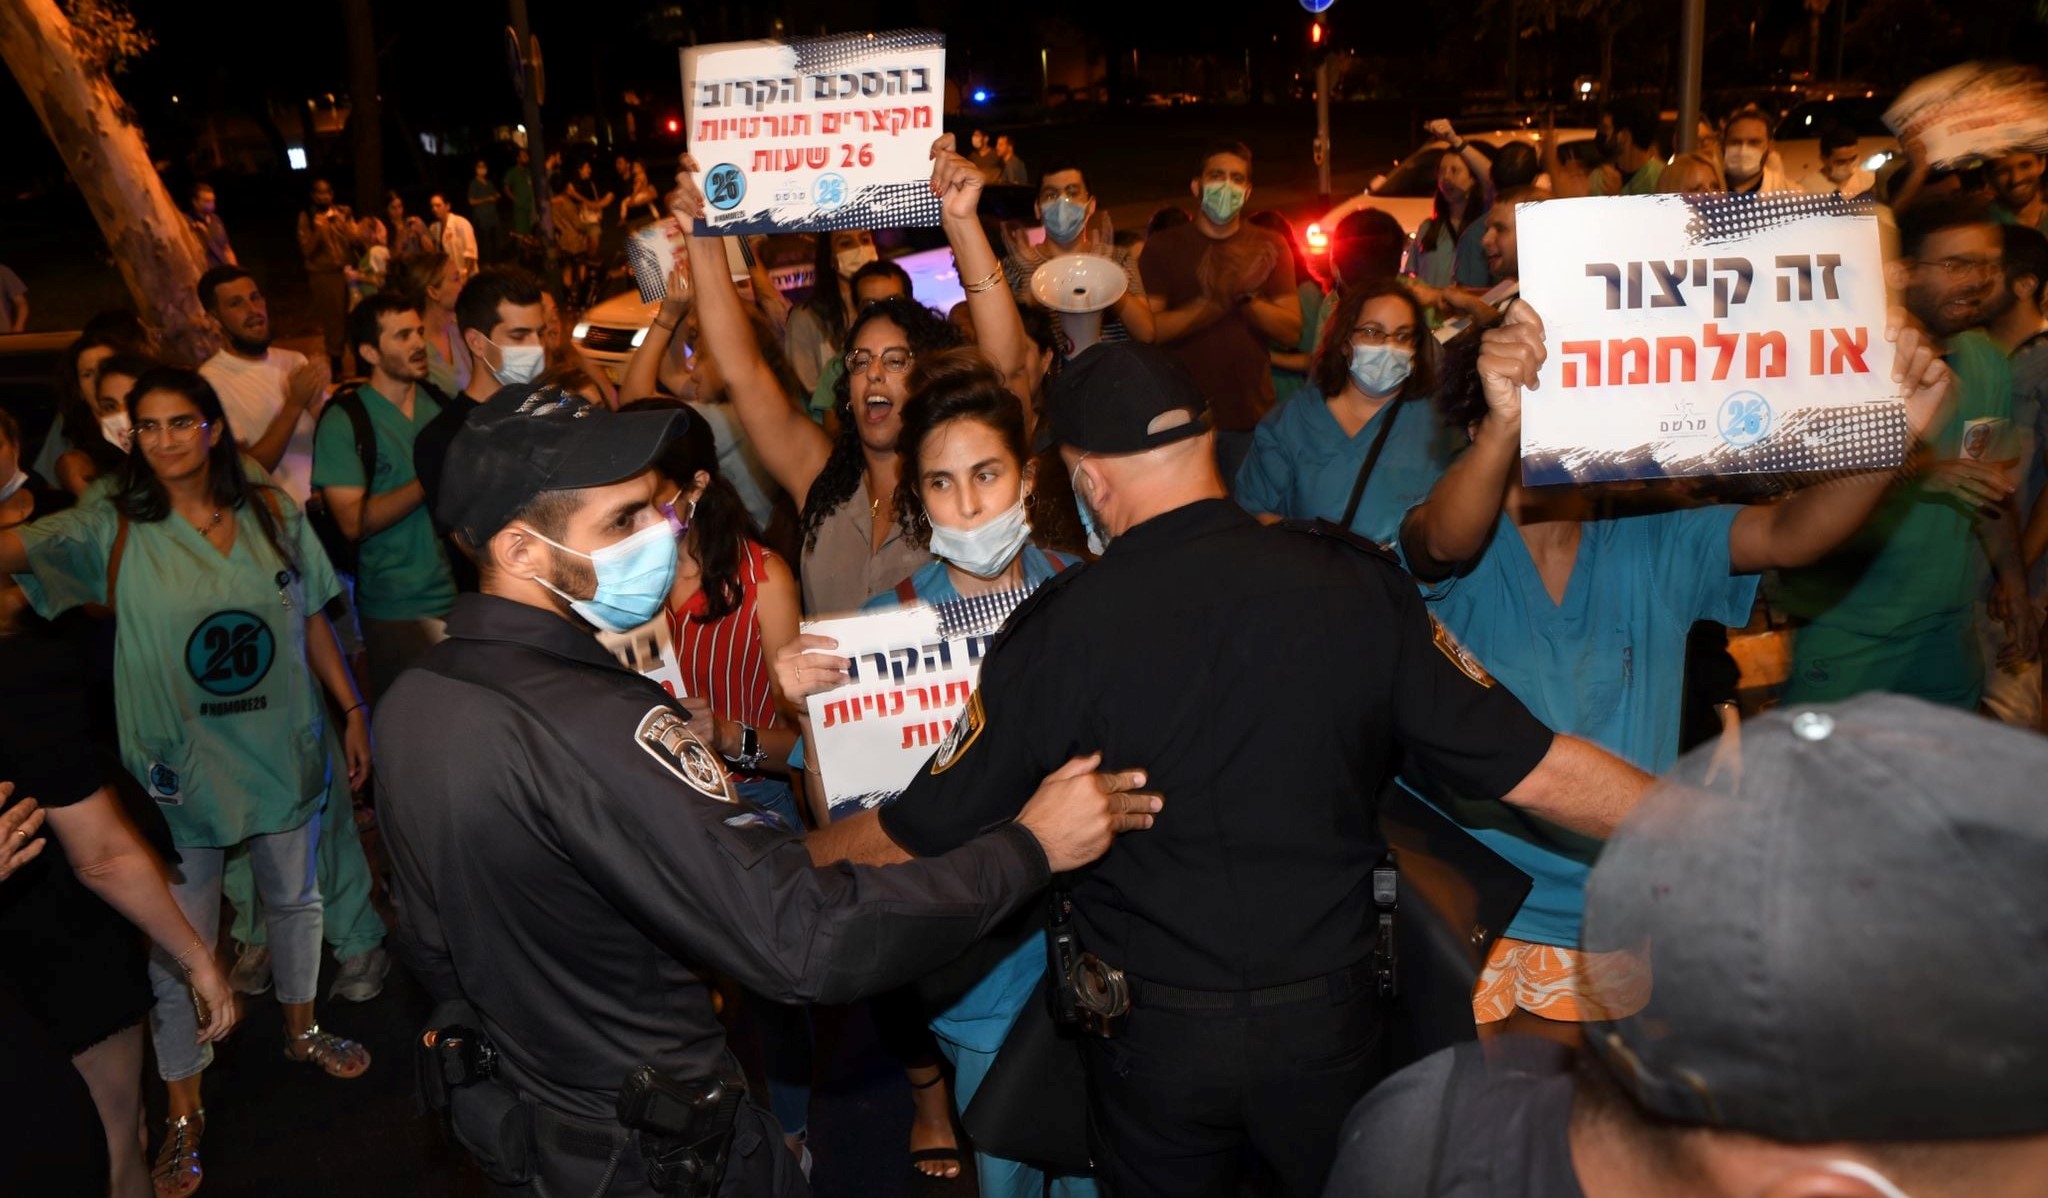 Hundreds of medical residents, interns and students of medicine demonstrated last Saturday night, September 25, outside the home of Economy Minister Orna Barbivai, to demand significant shortening of their work shifts in hospitals.